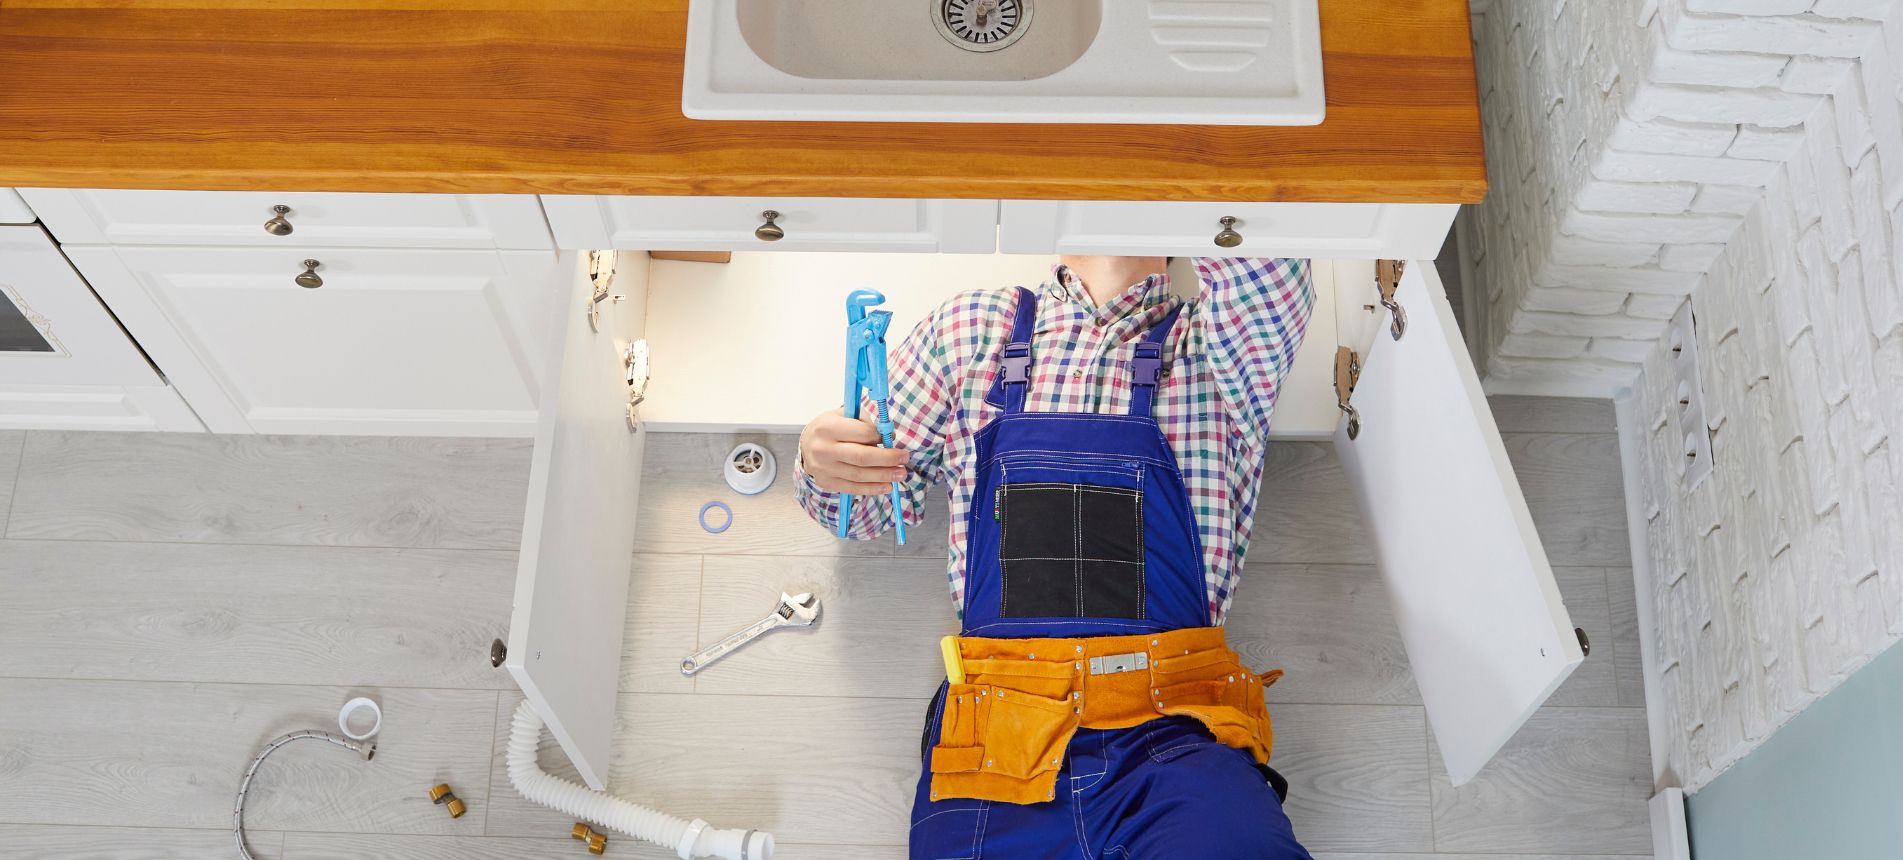 Common Reasons Your Bathroom Sink Is Clogged